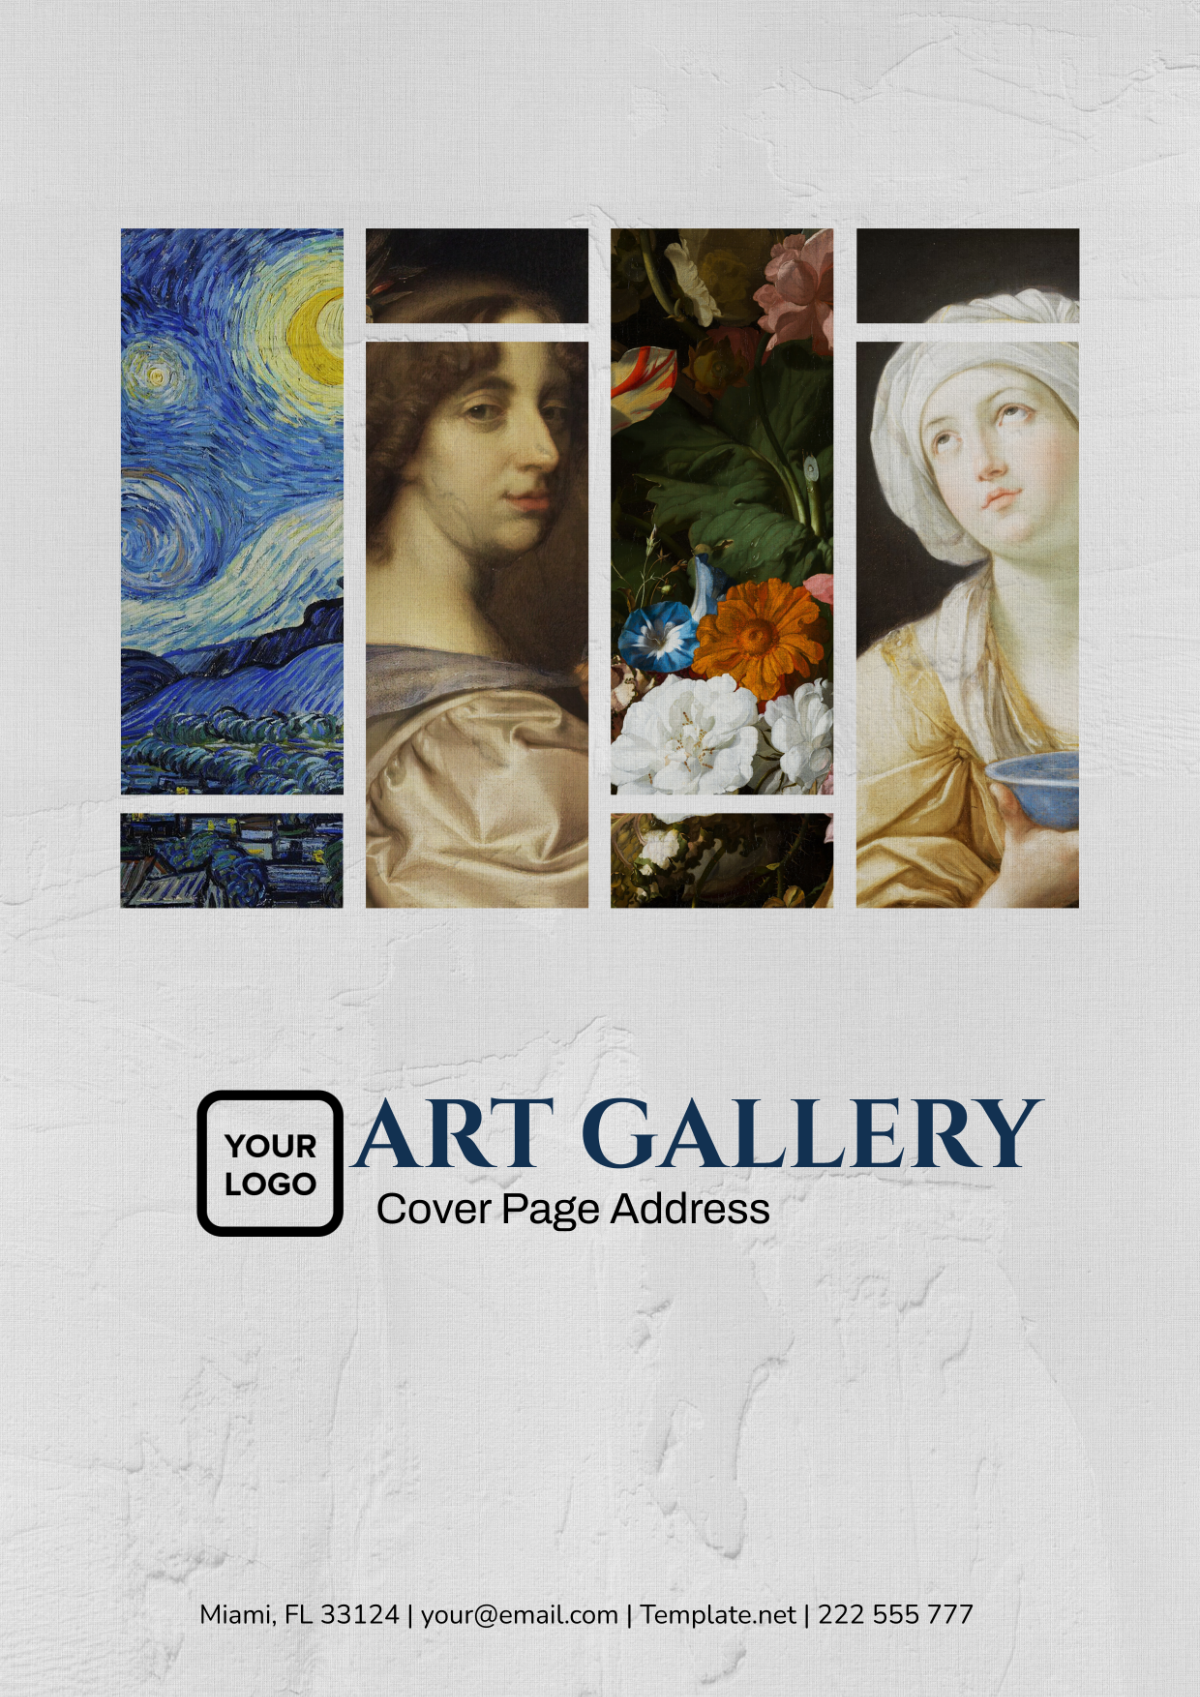 Art Gallery Cover Page Address